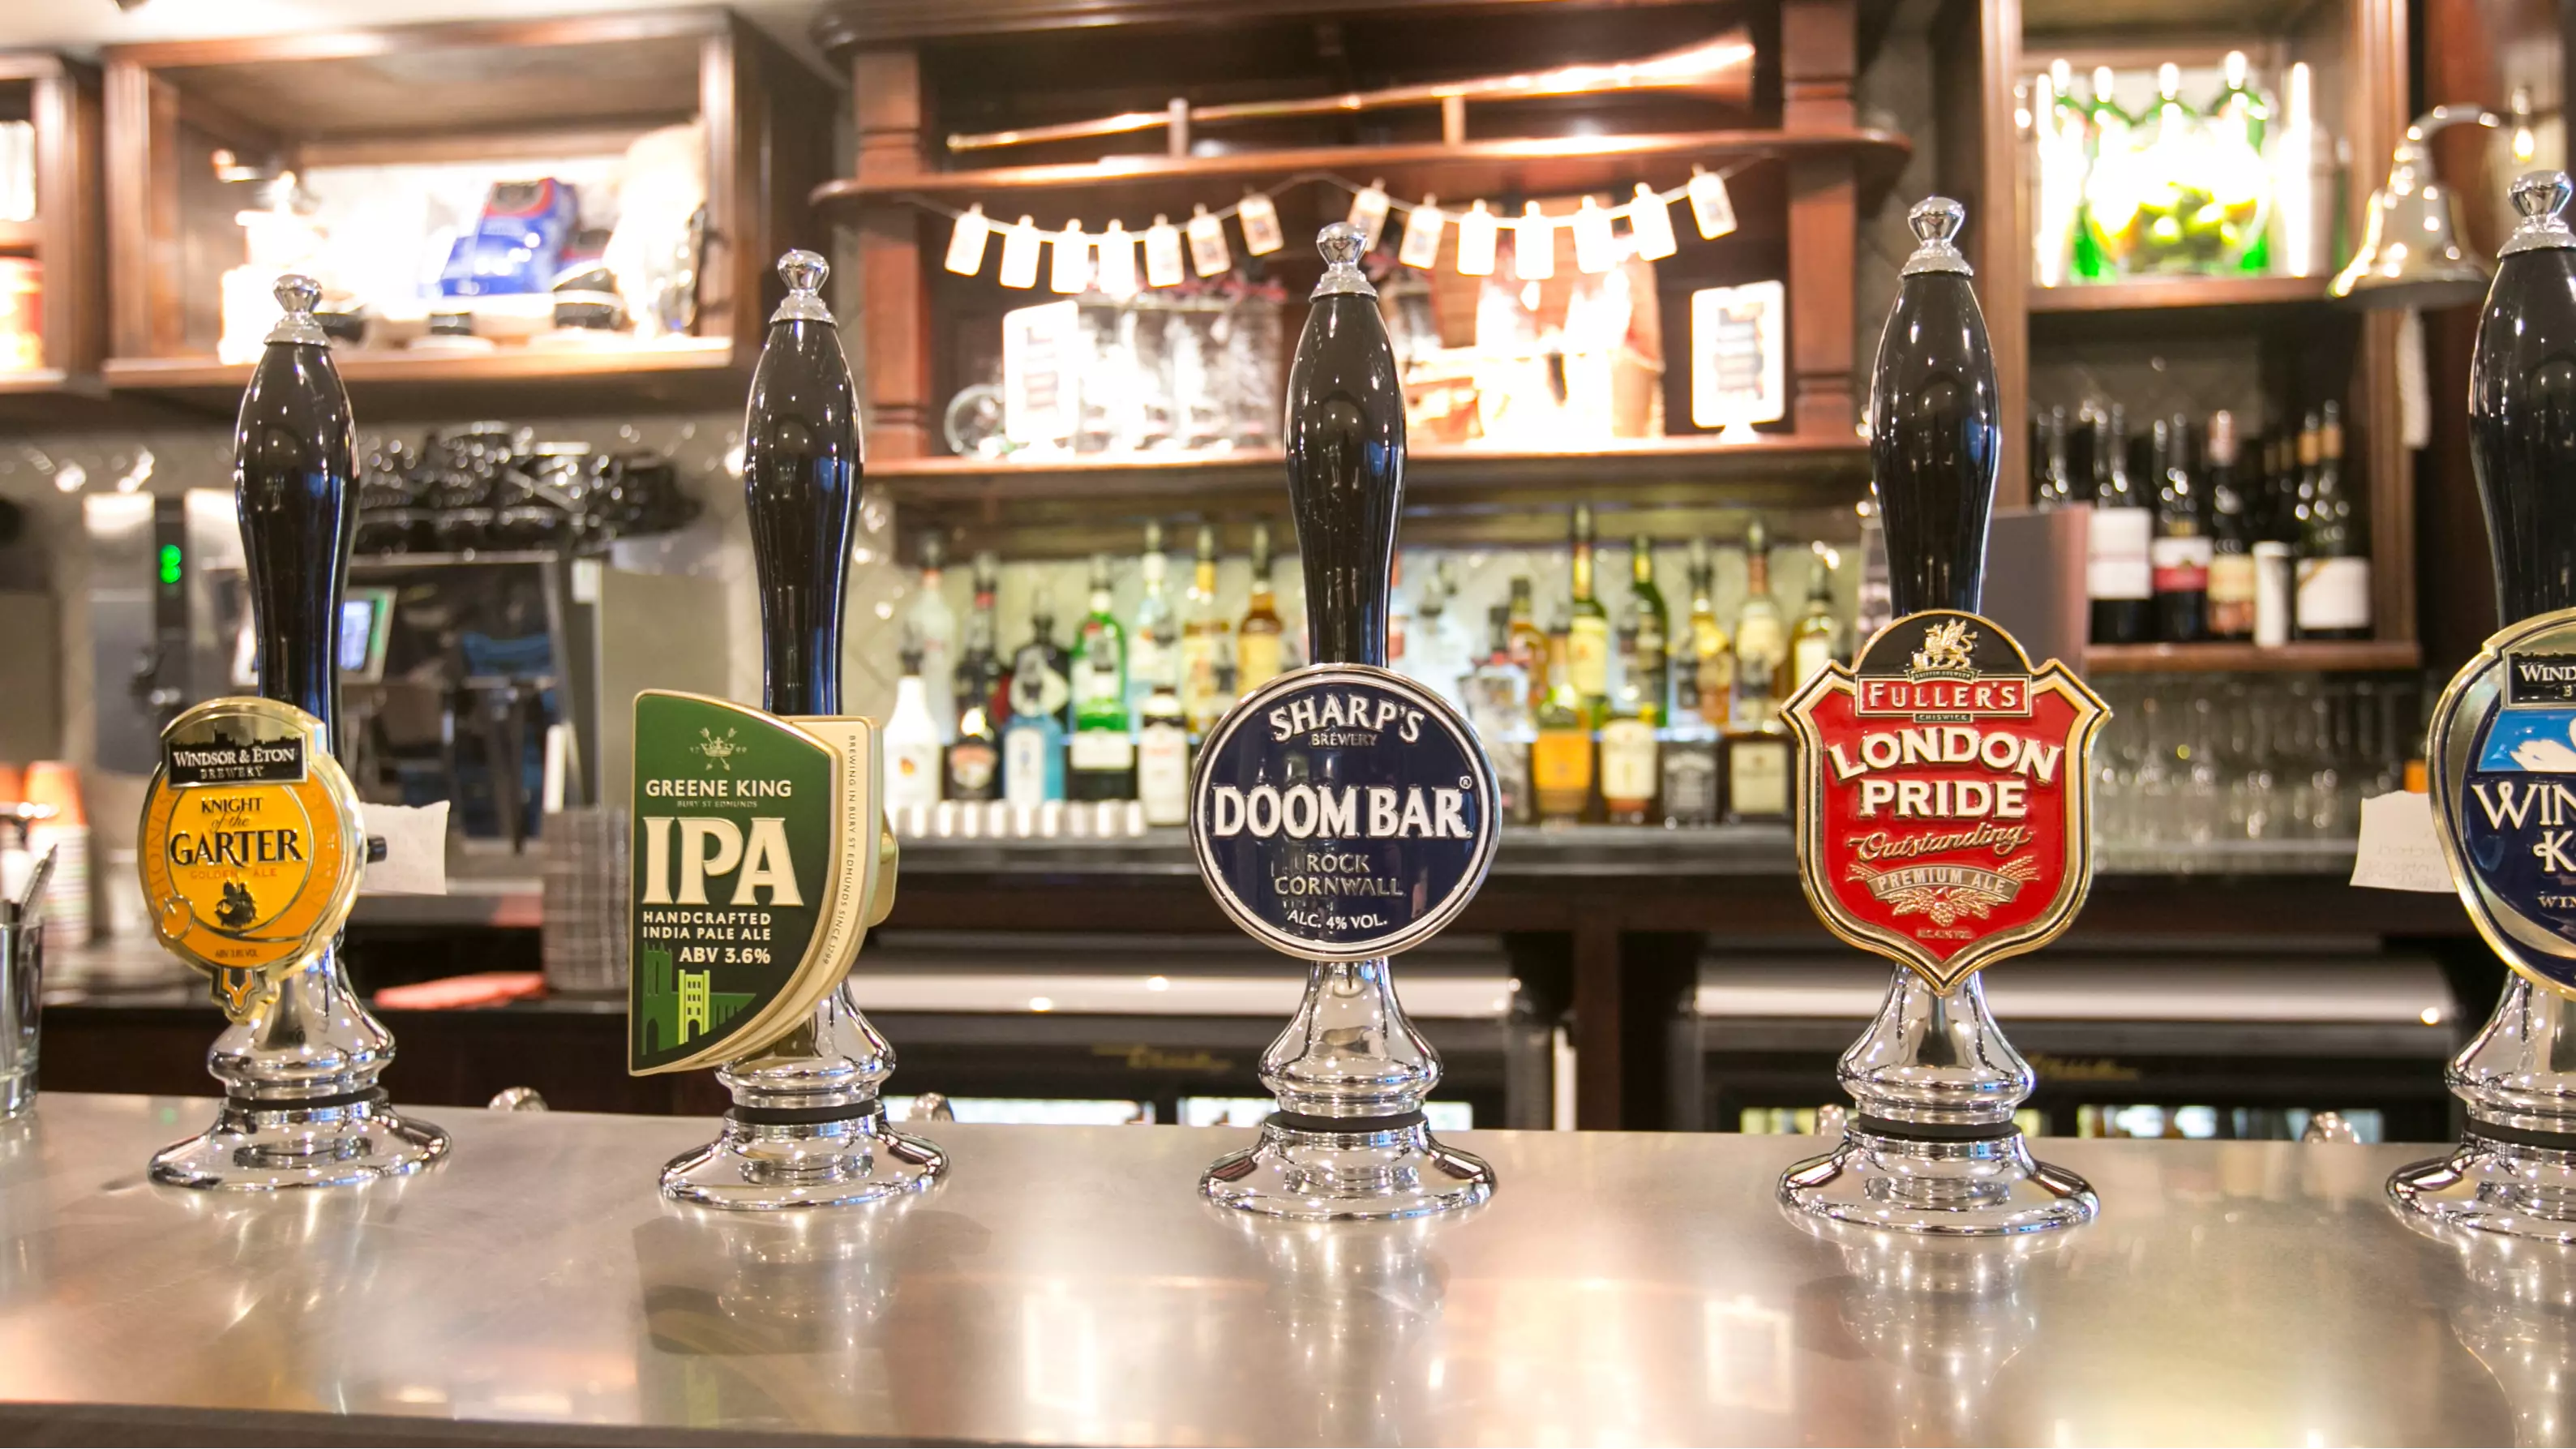 This Website Shows You Which Wetherspoon Pubs Offer The Best Value